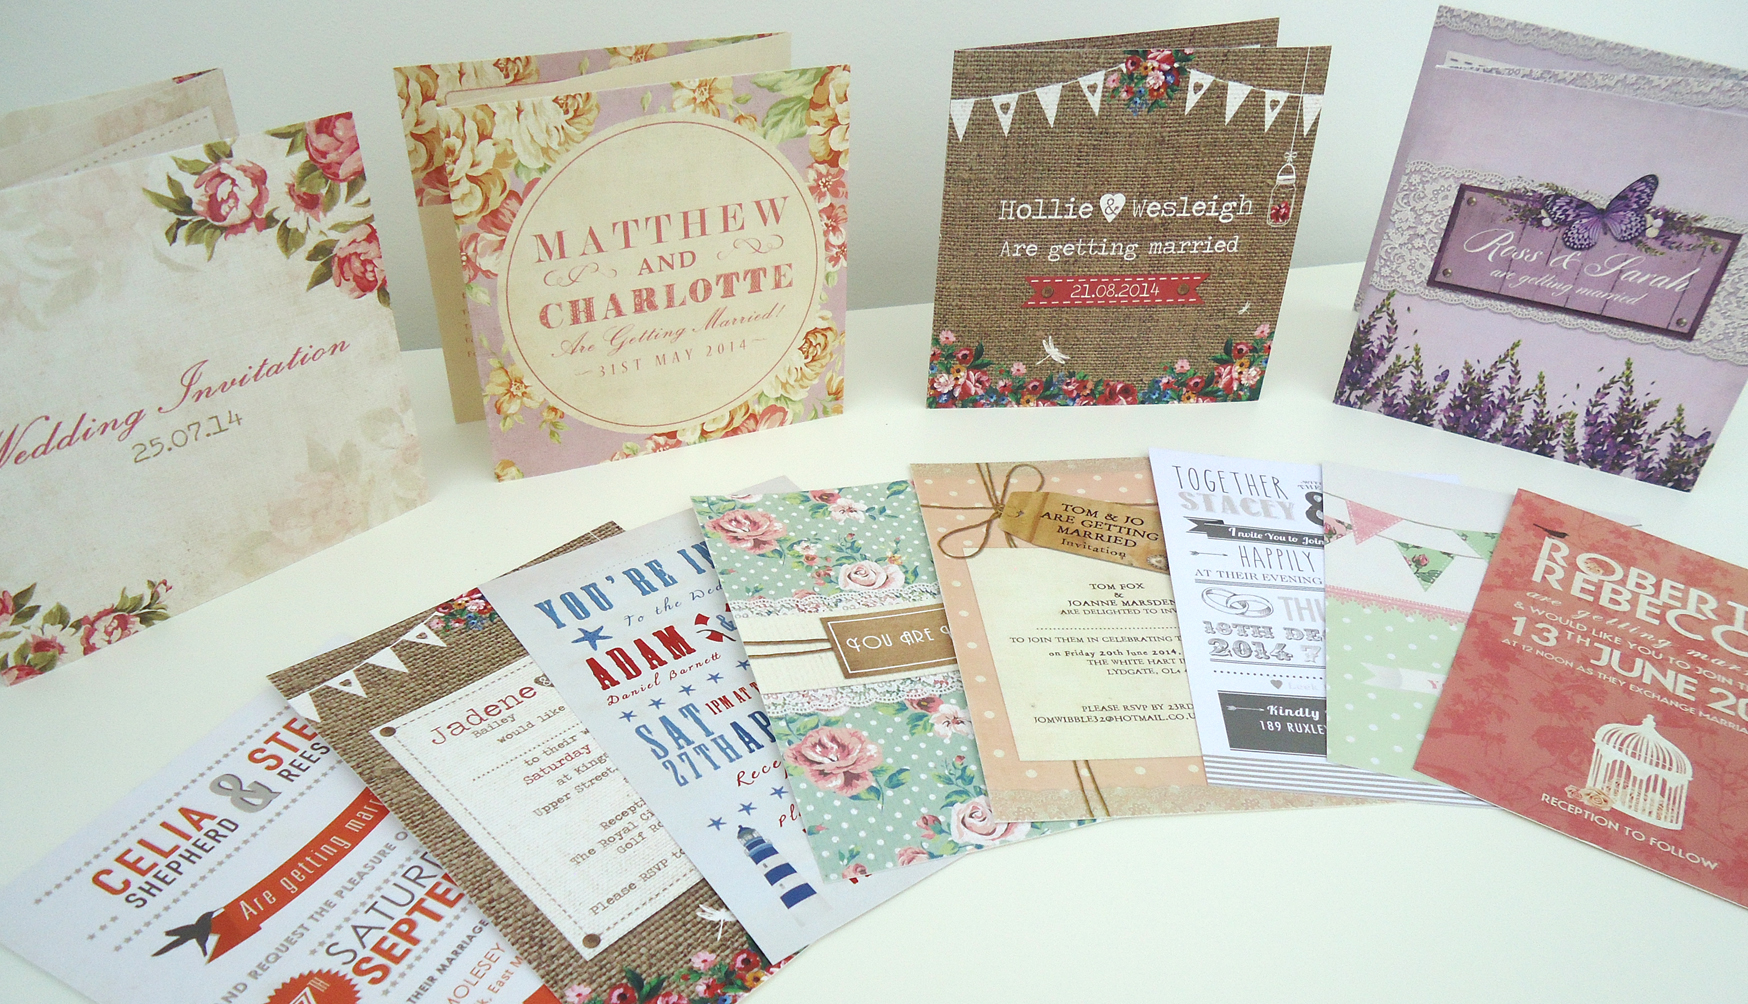 A selection of different wedding invites designed by Heart Invites